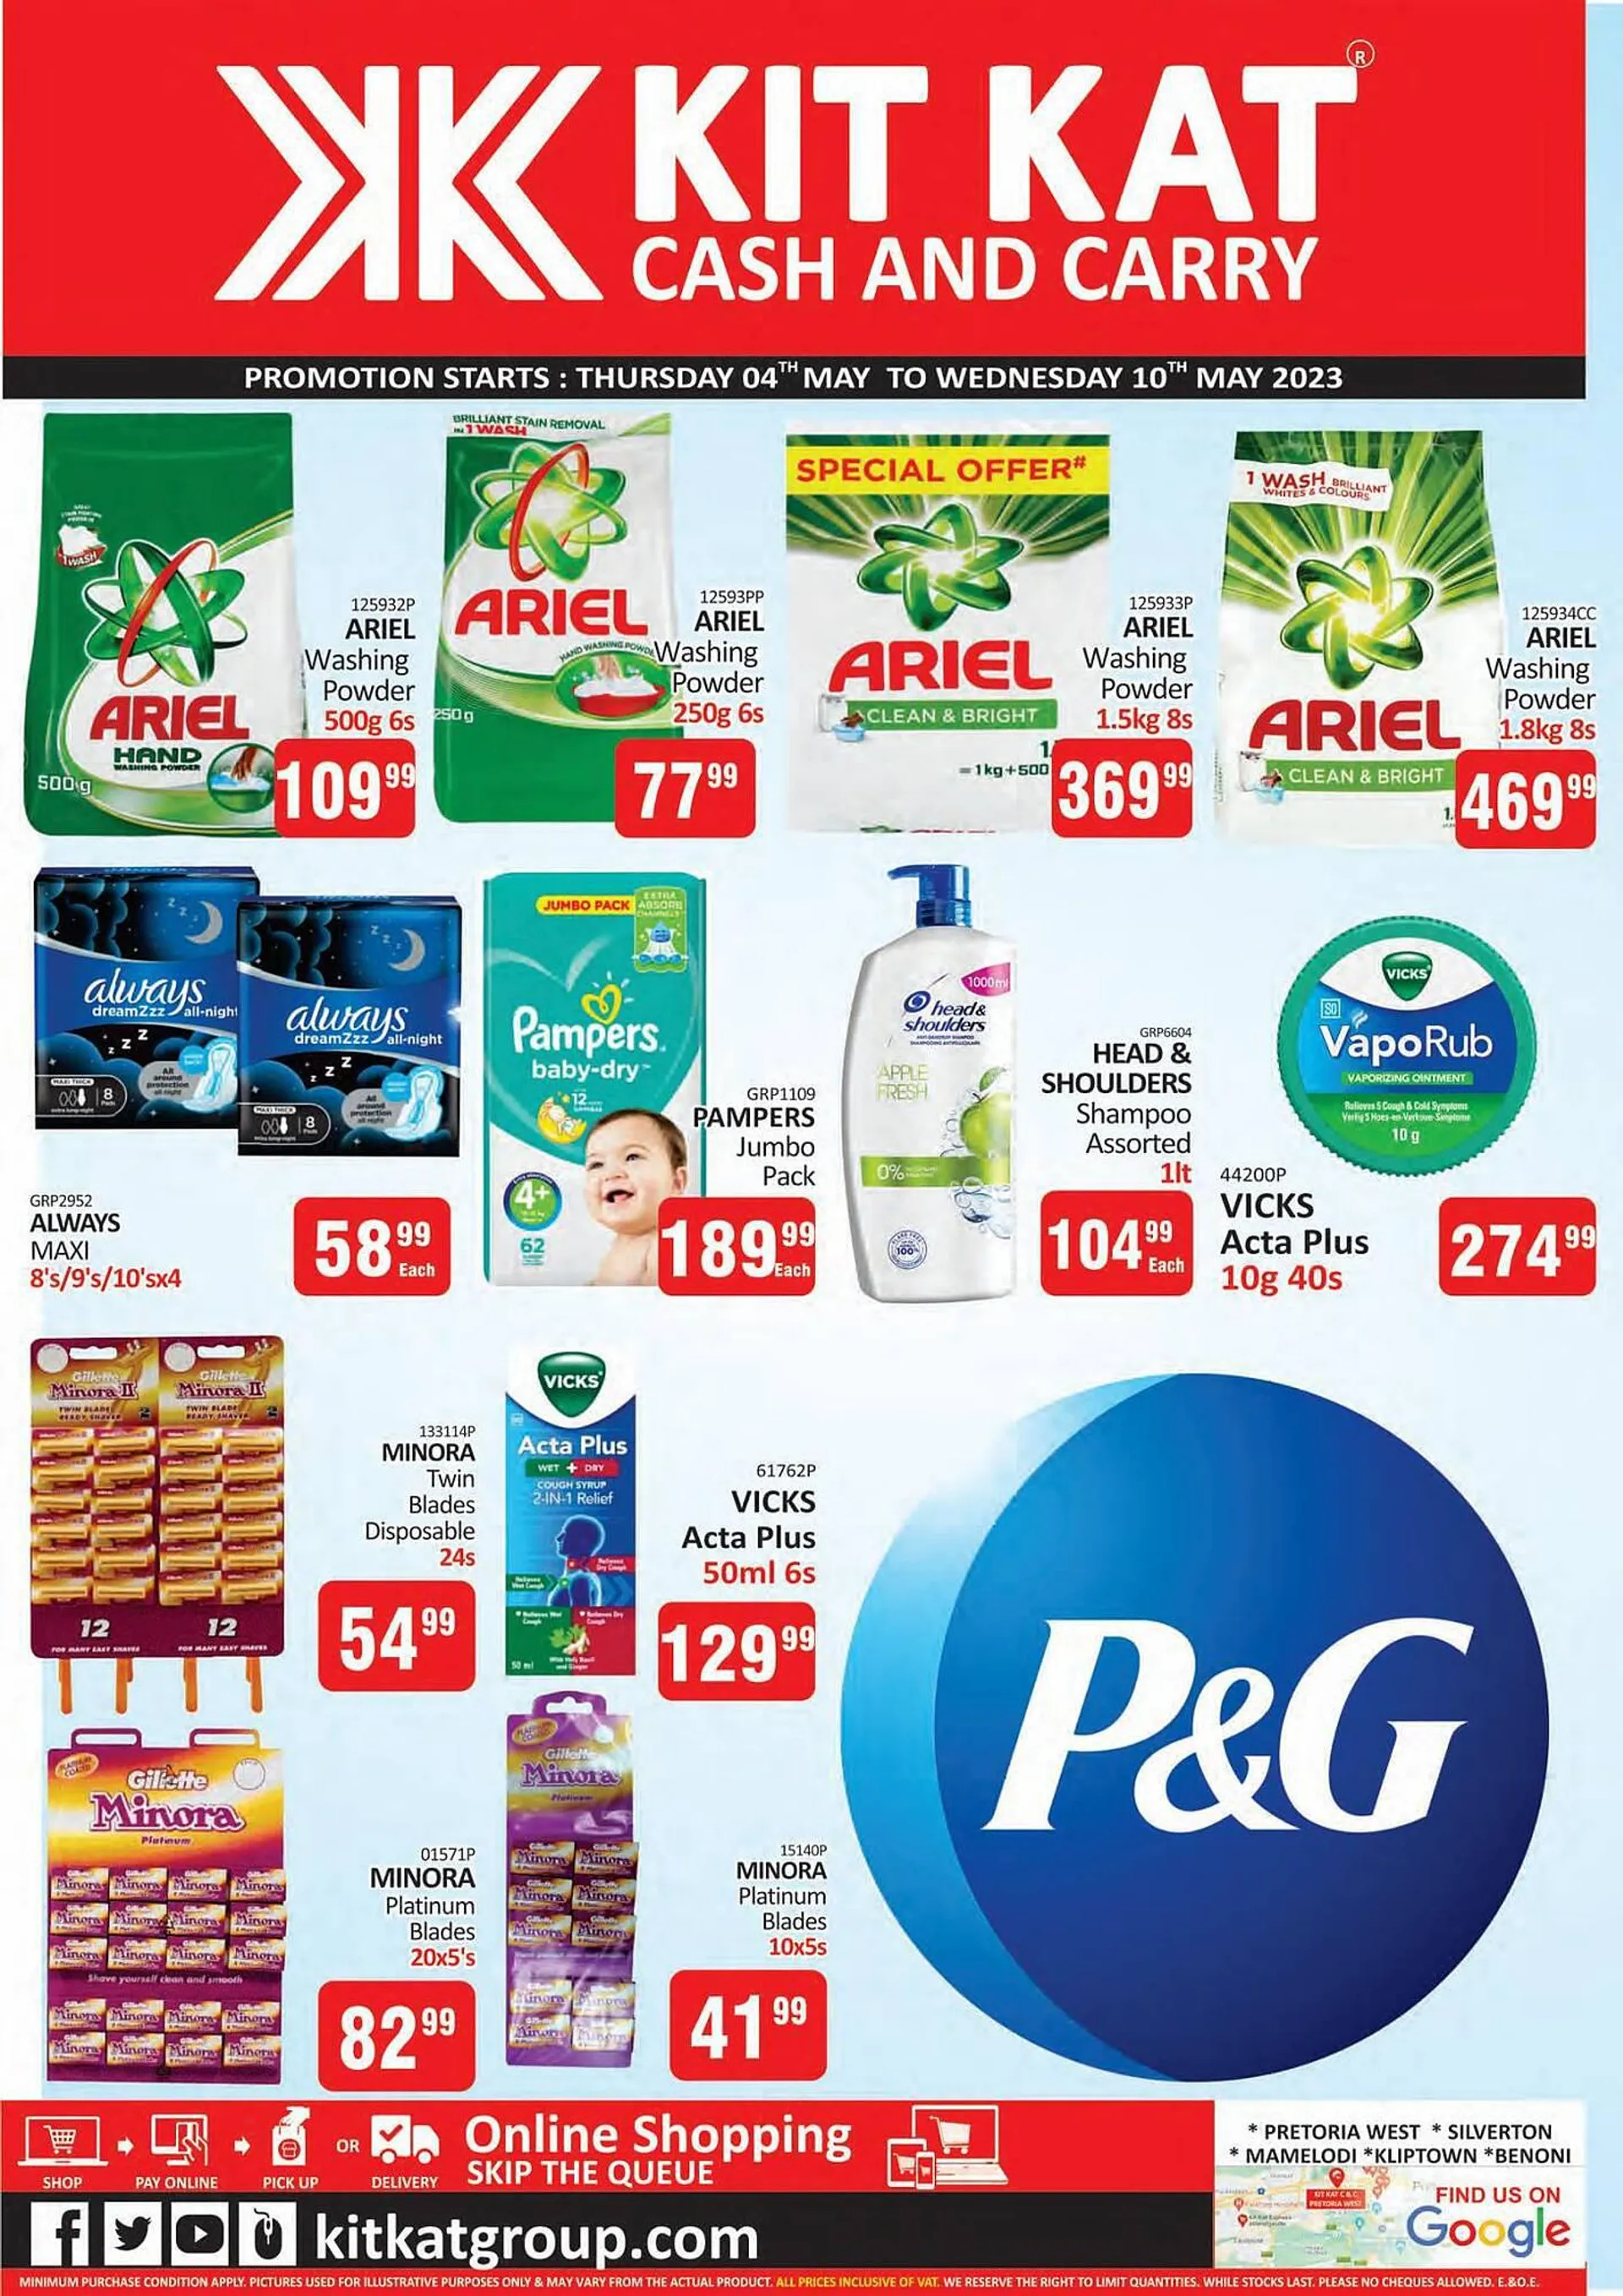 KitKat Cash and Carry catalogue - 1